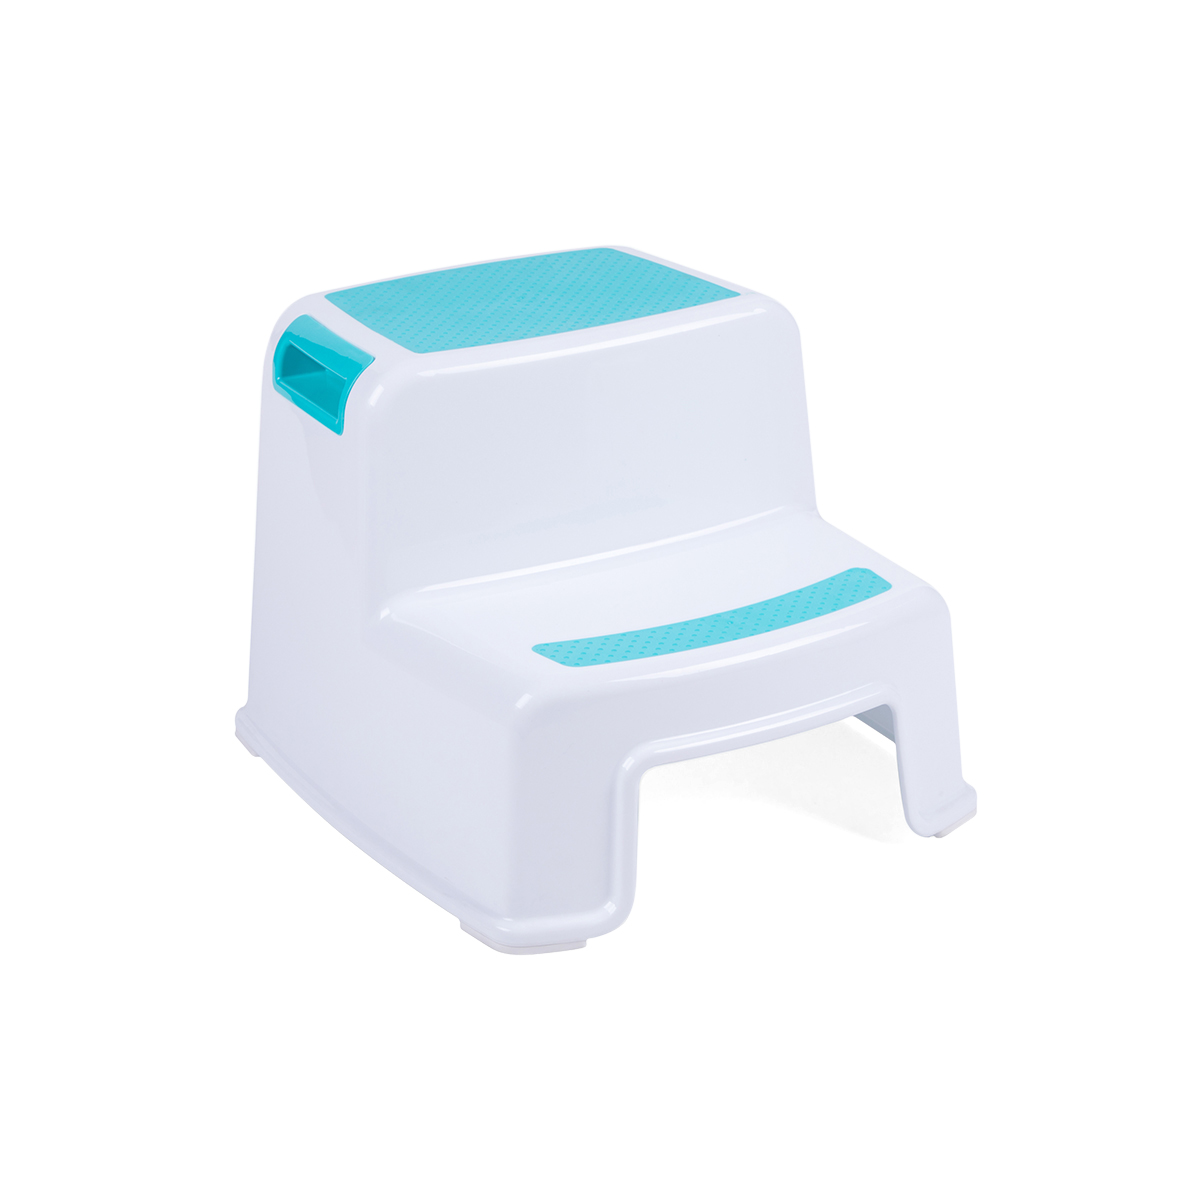 Dual Step Stool for Kids